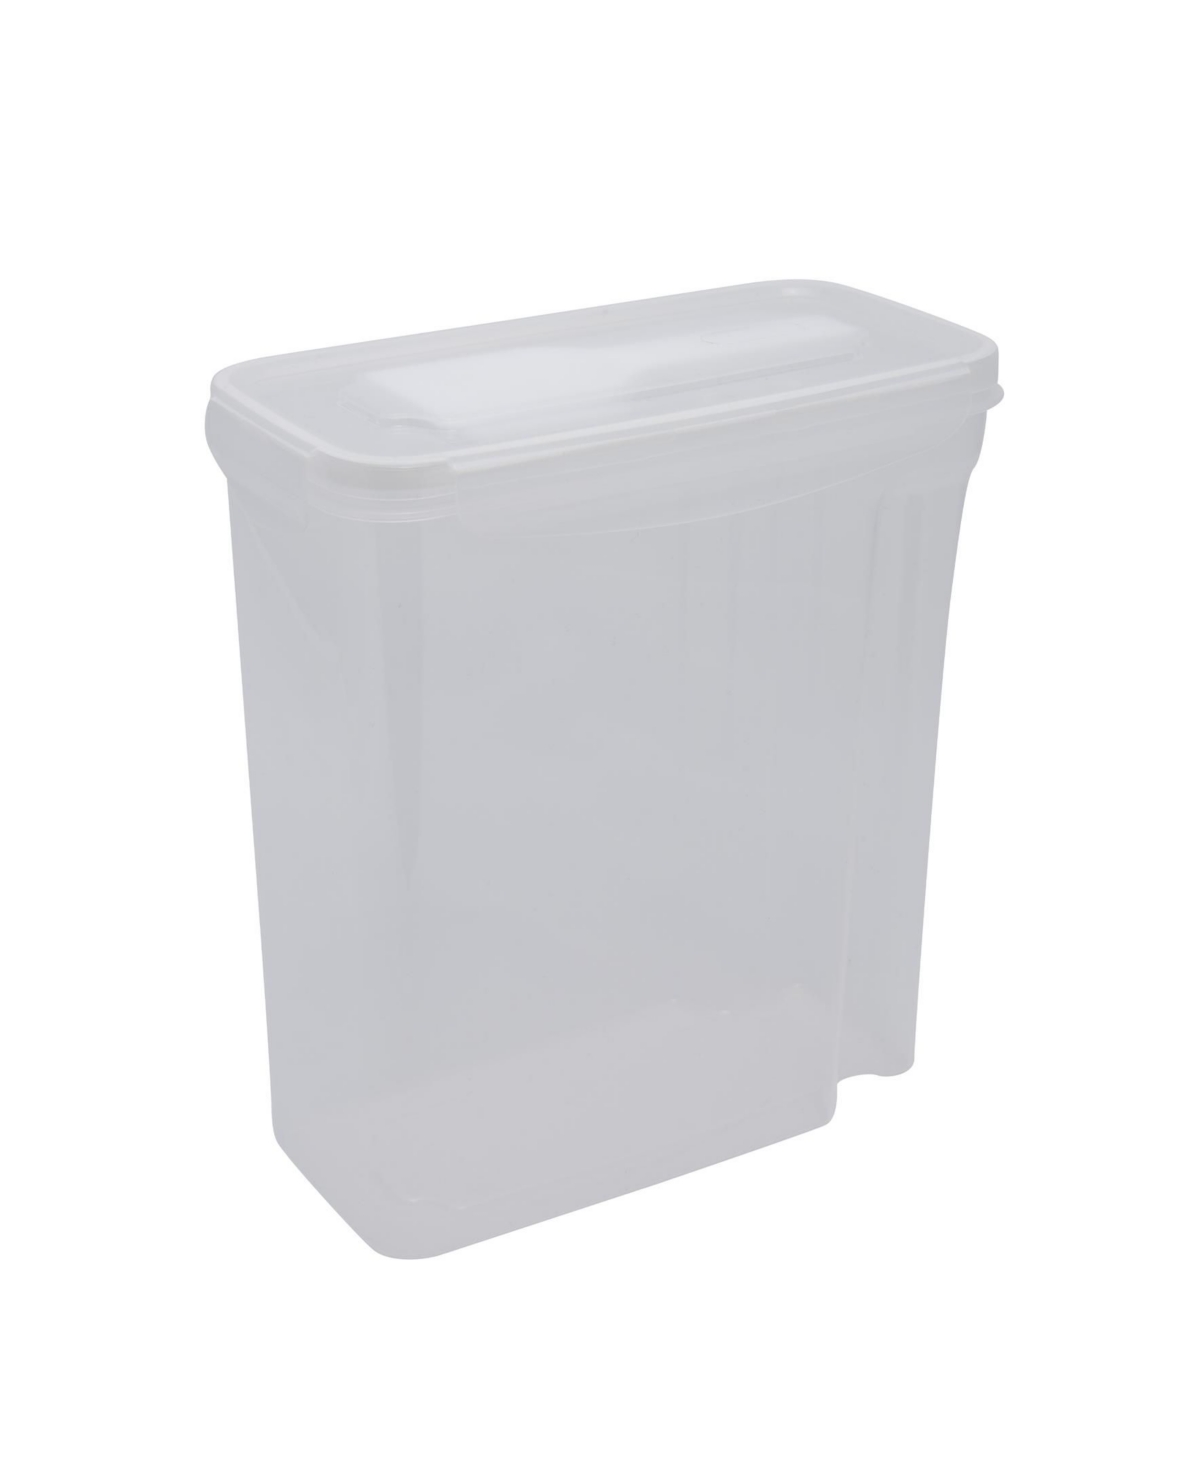 Large Size Airtight Cereal Container with Scooper - Clear